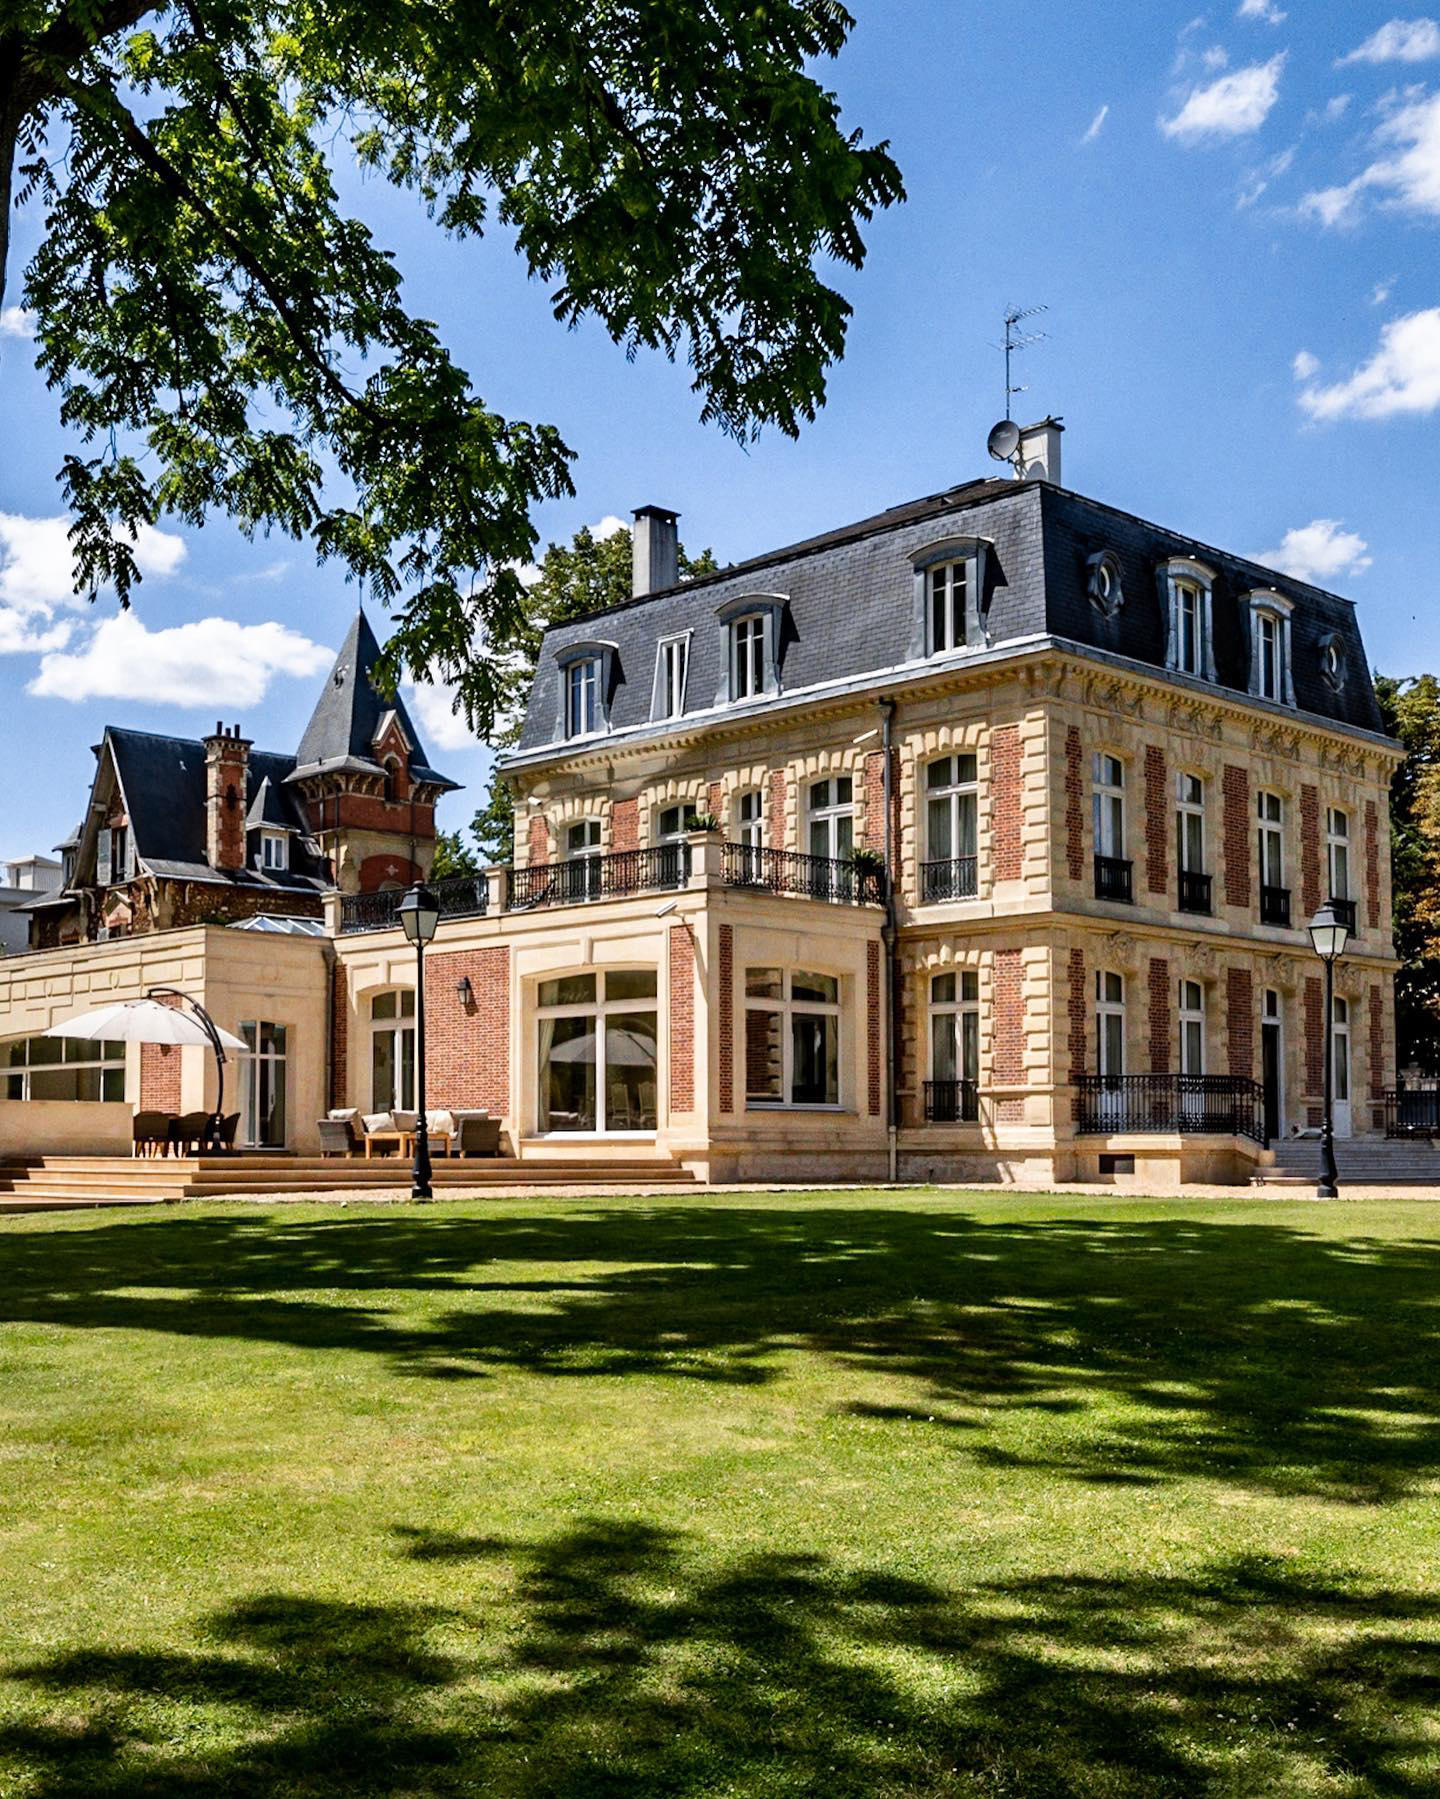 KRETZ FAMILY REAL ESTATE - Discover an authentic 19th century private mansion in Saint Cloud